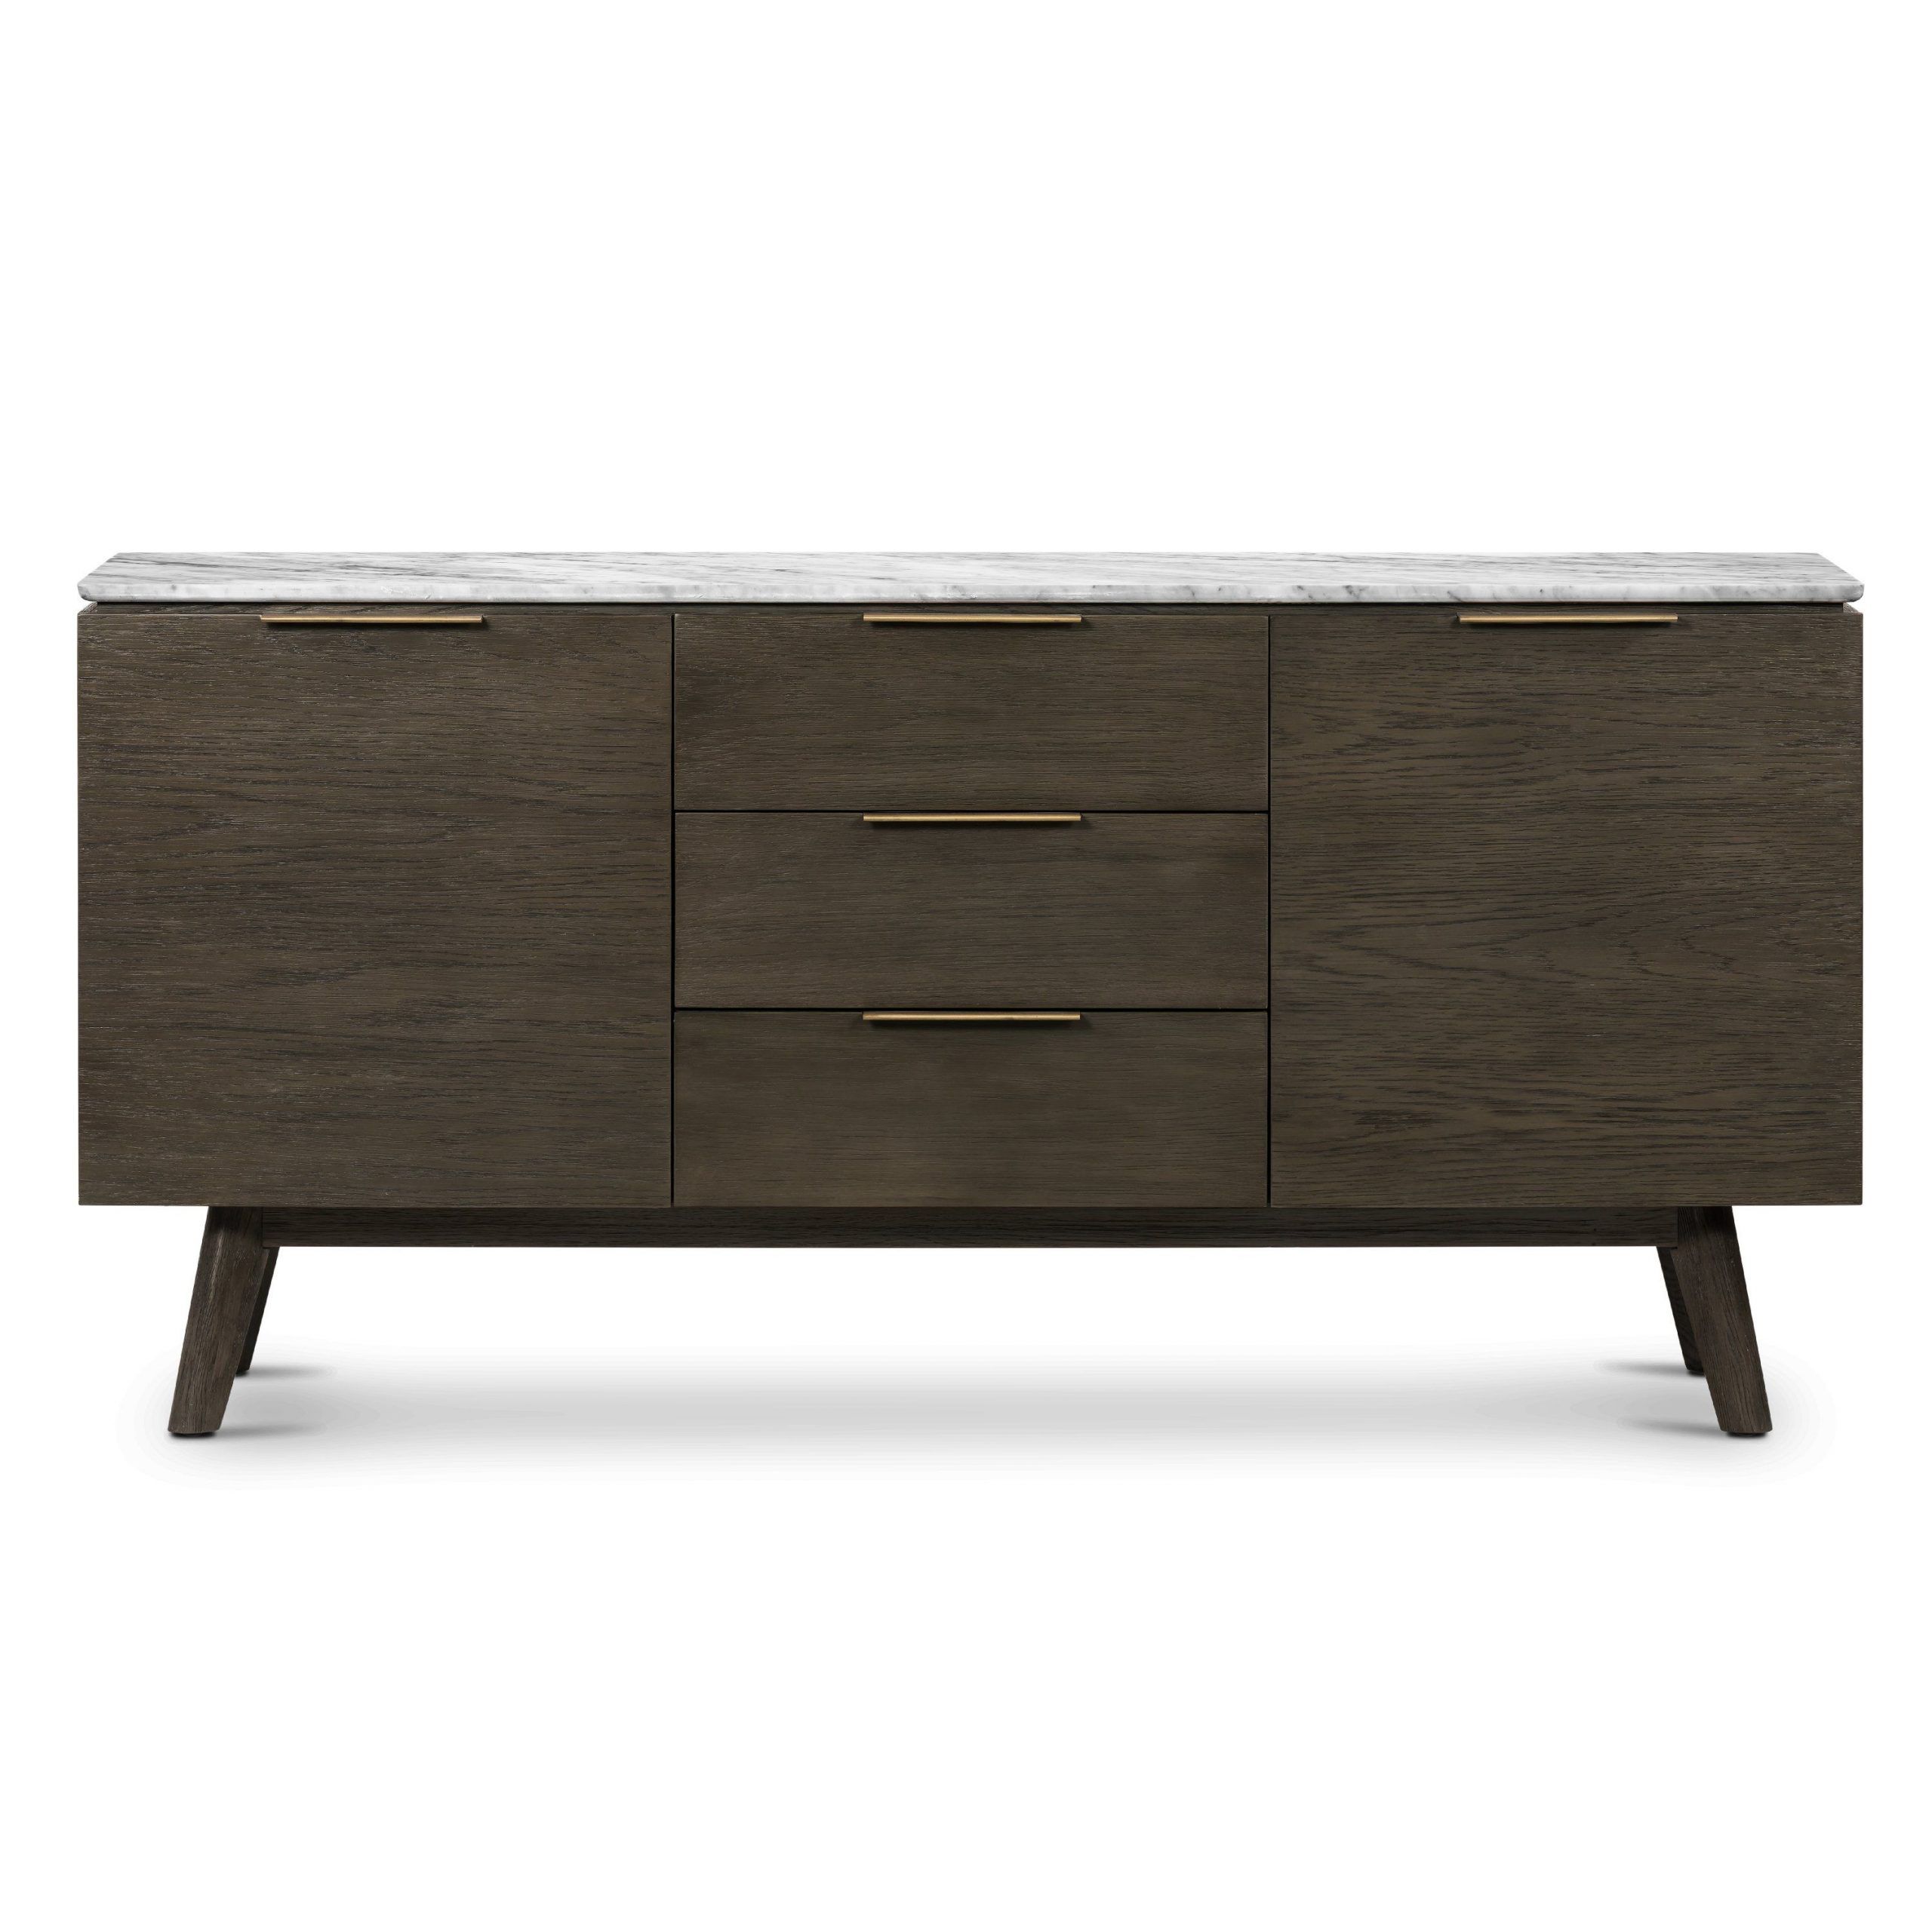 Zev Sideboard – Poly & Bark | Storage Spaces, Dining Room Intended For Florence Mid Century Modern Right Sectional Sofas Cognac Tan (View 15 of 15)